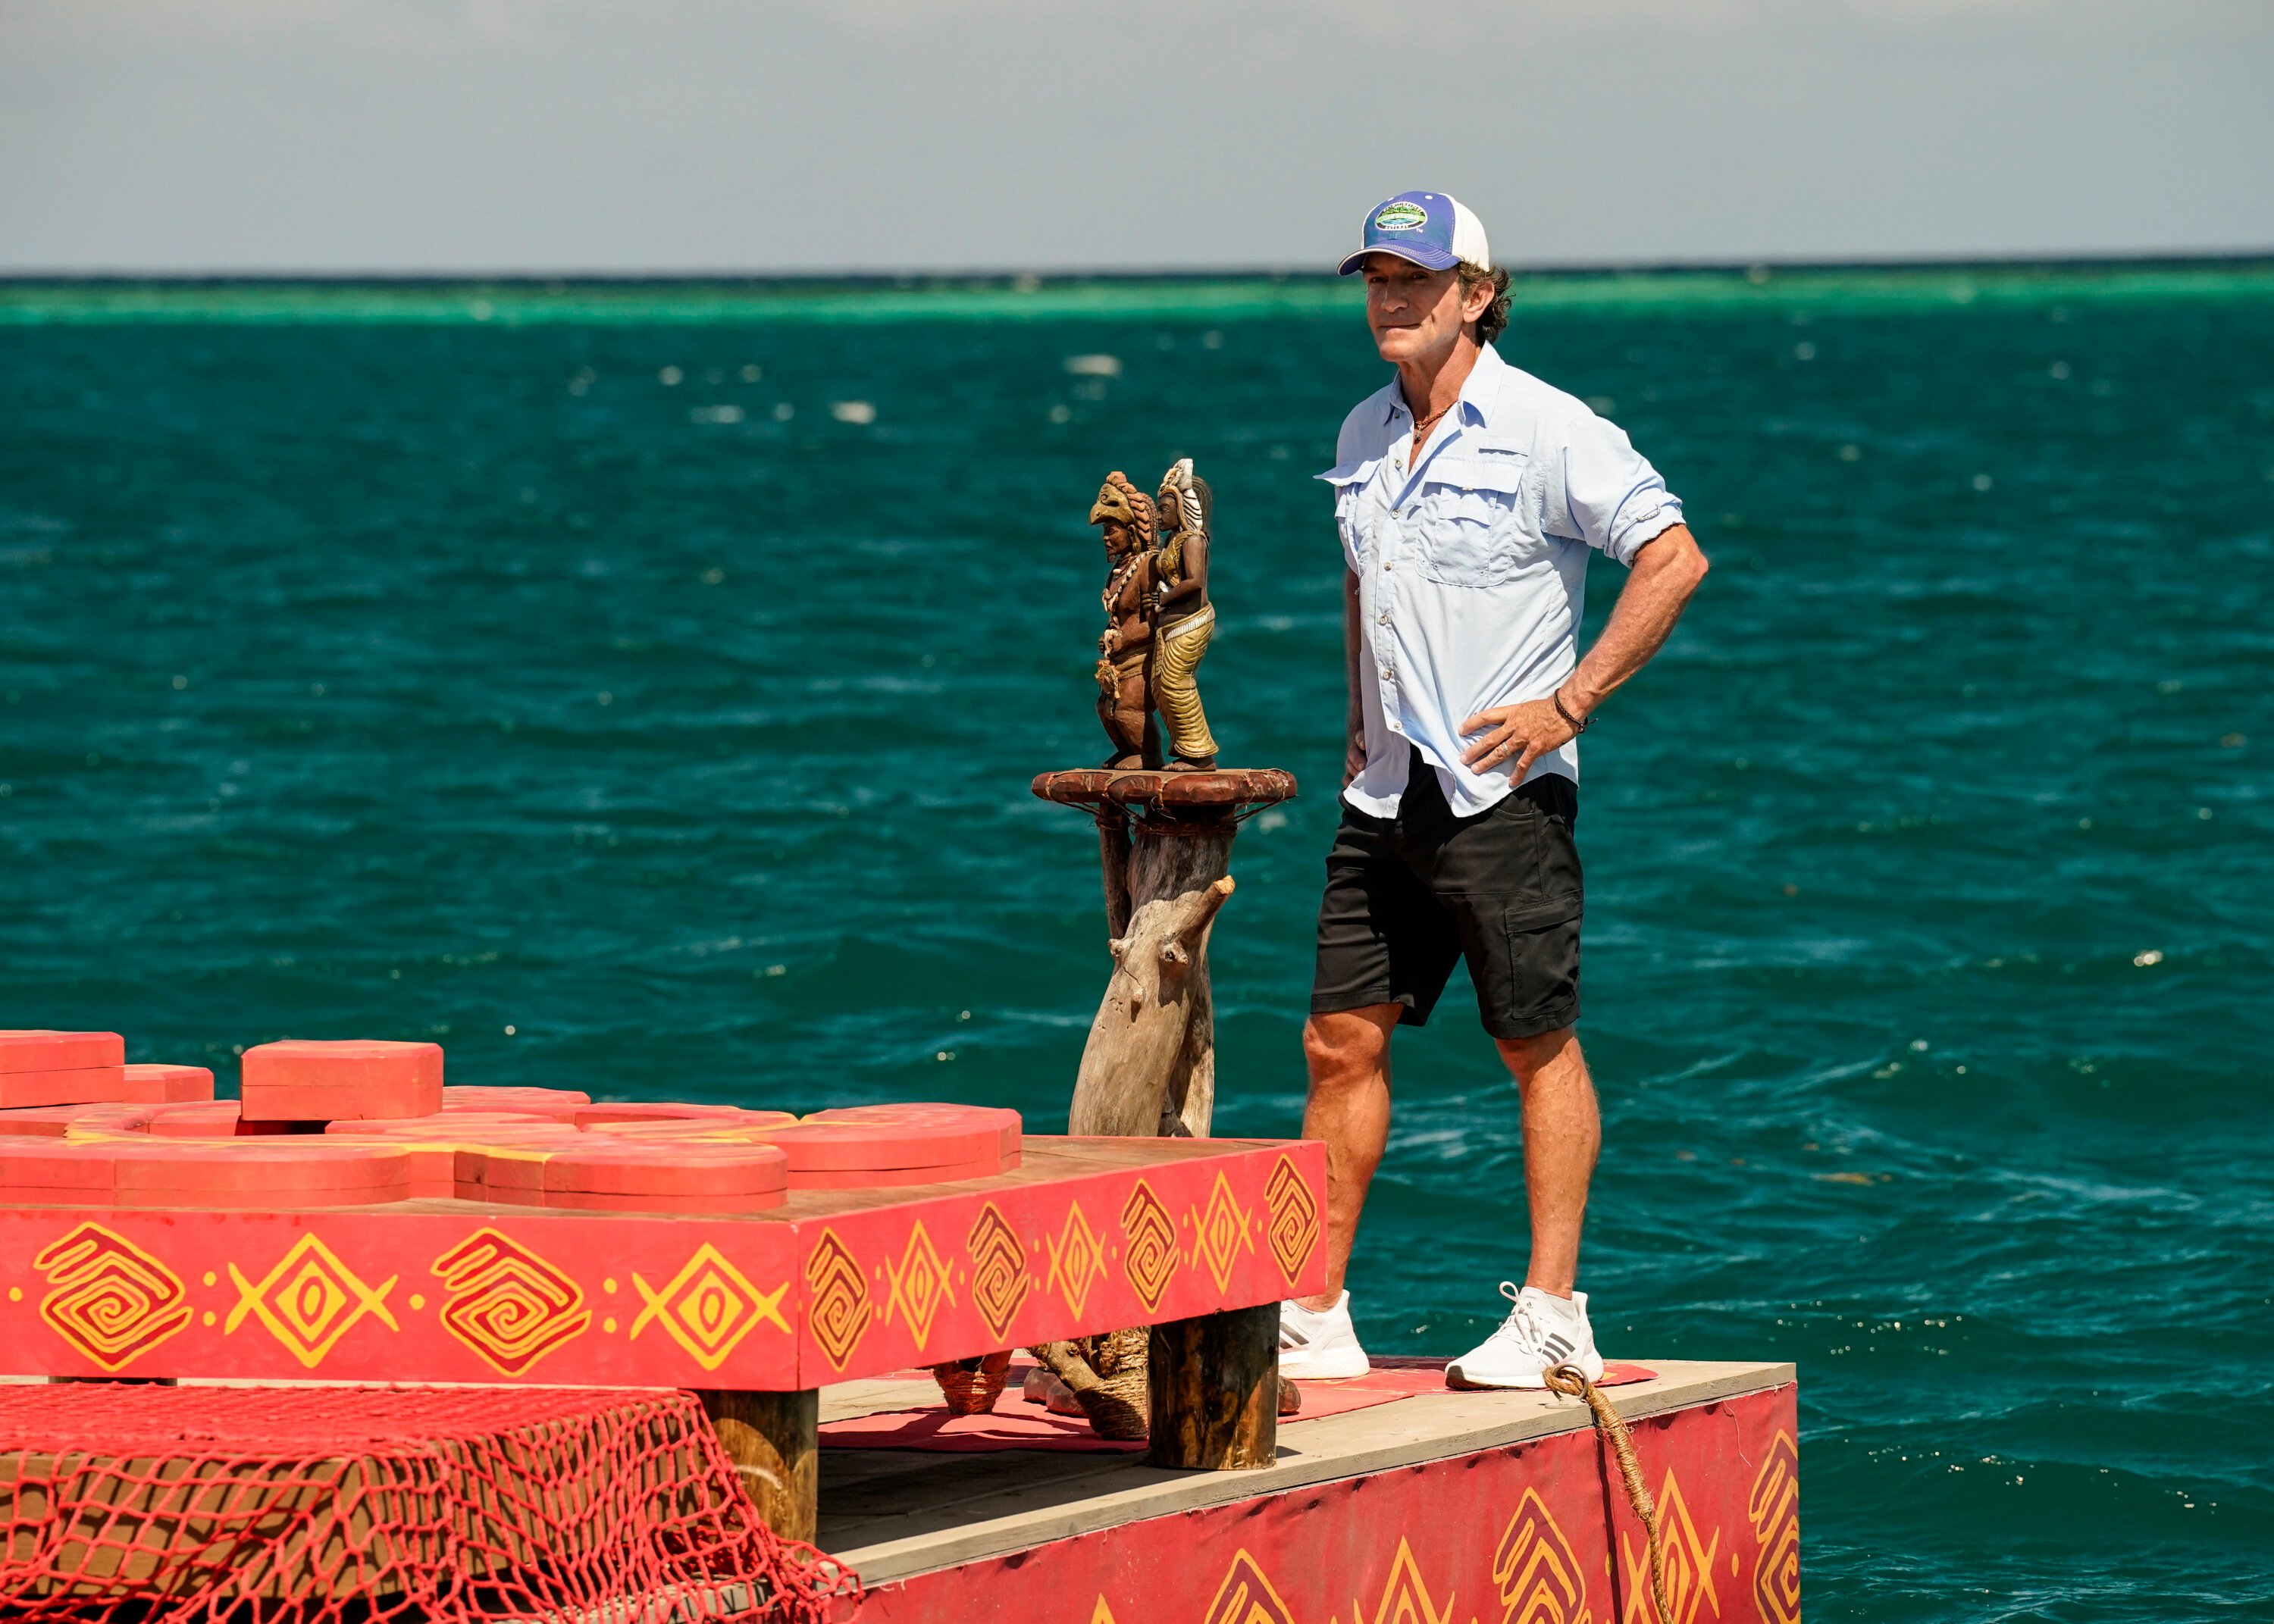 Jeff Probst, the host of 'Survivor' Season 43 on CBS, wears a light blue button-up shirt, black shorts, and a blue and white 'Survivor' baseball cap while standing on a platform in the water.